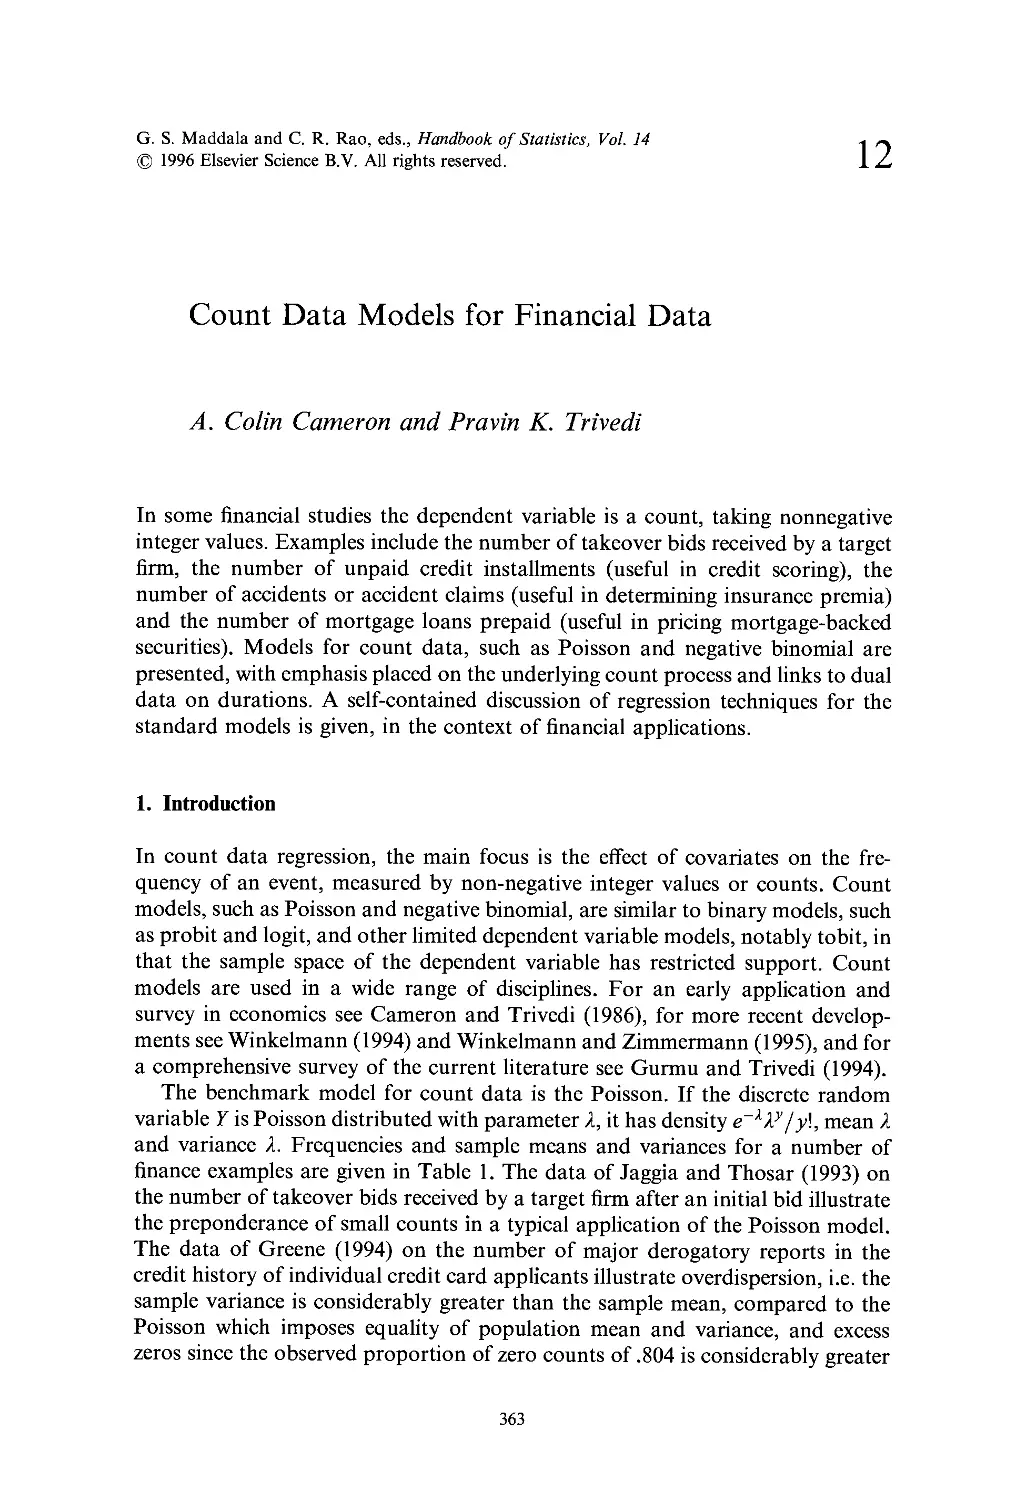 12. Count Data Models for Financial Data